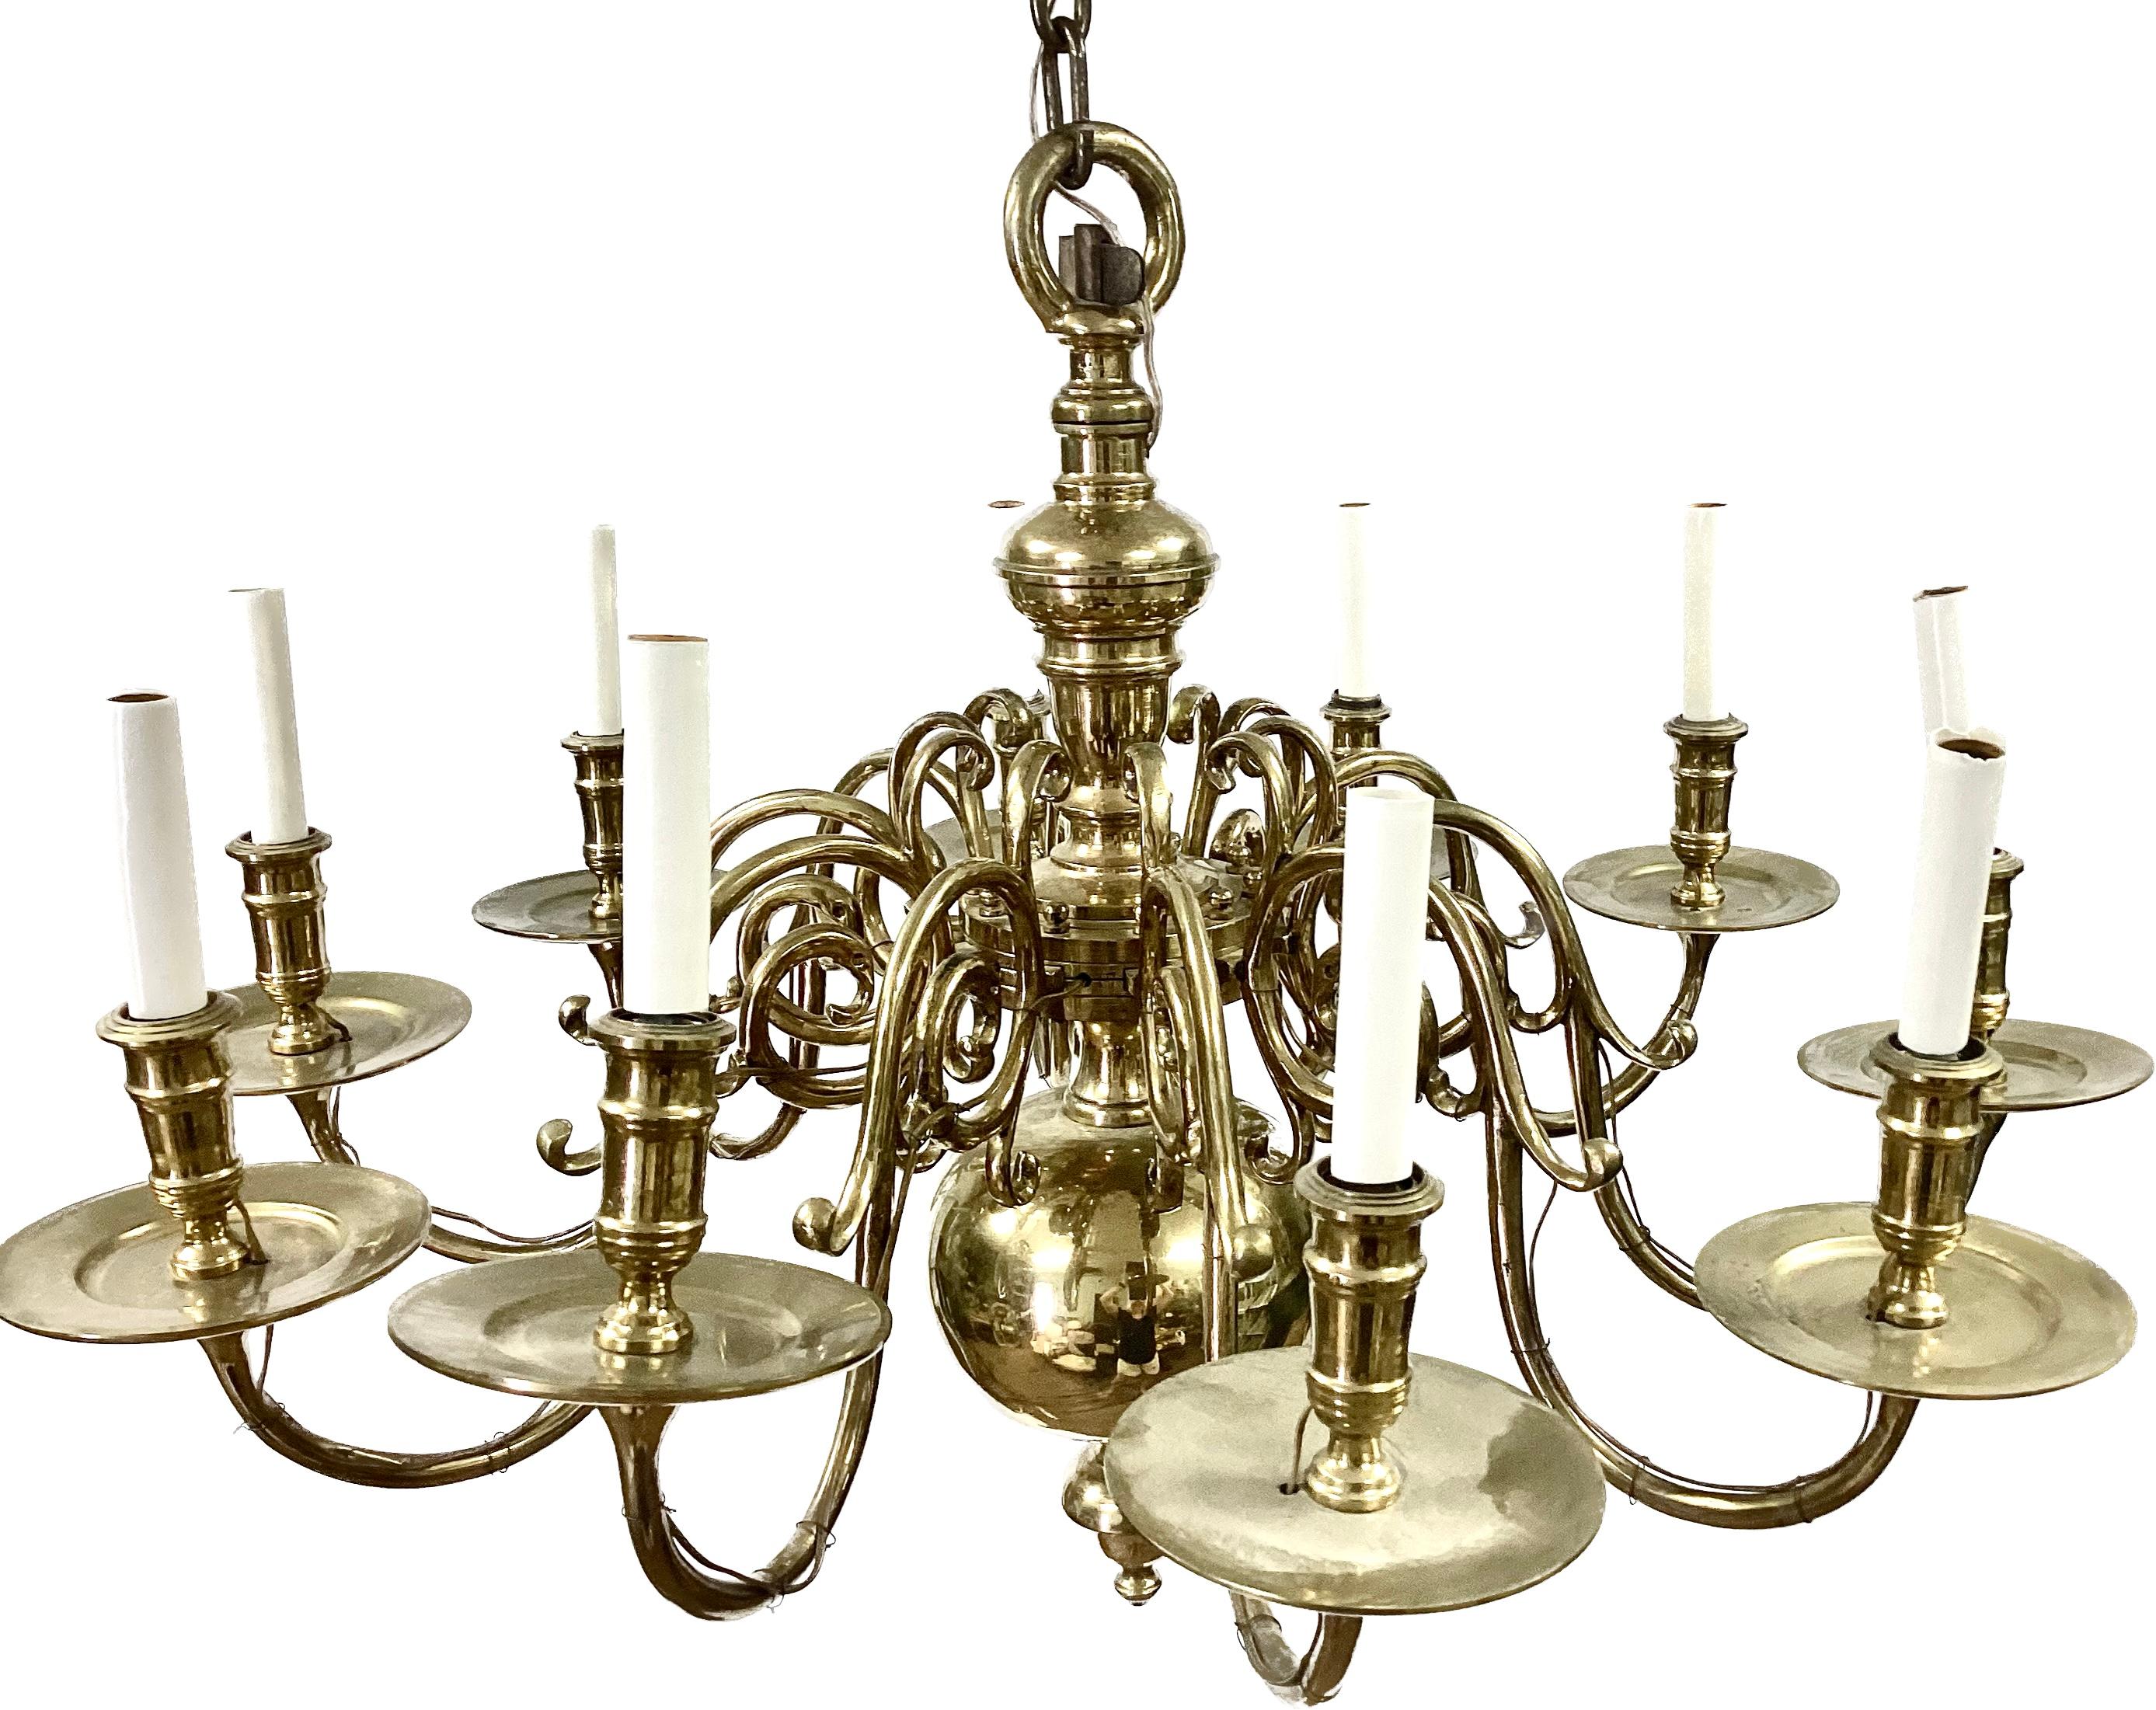 Early 20th century Dutch Baroque solid brass 10-armed chandelier with candle stems. Classic ball design with angular arms. Hard-wired with adjustable chain. Very heavy solid brass. 